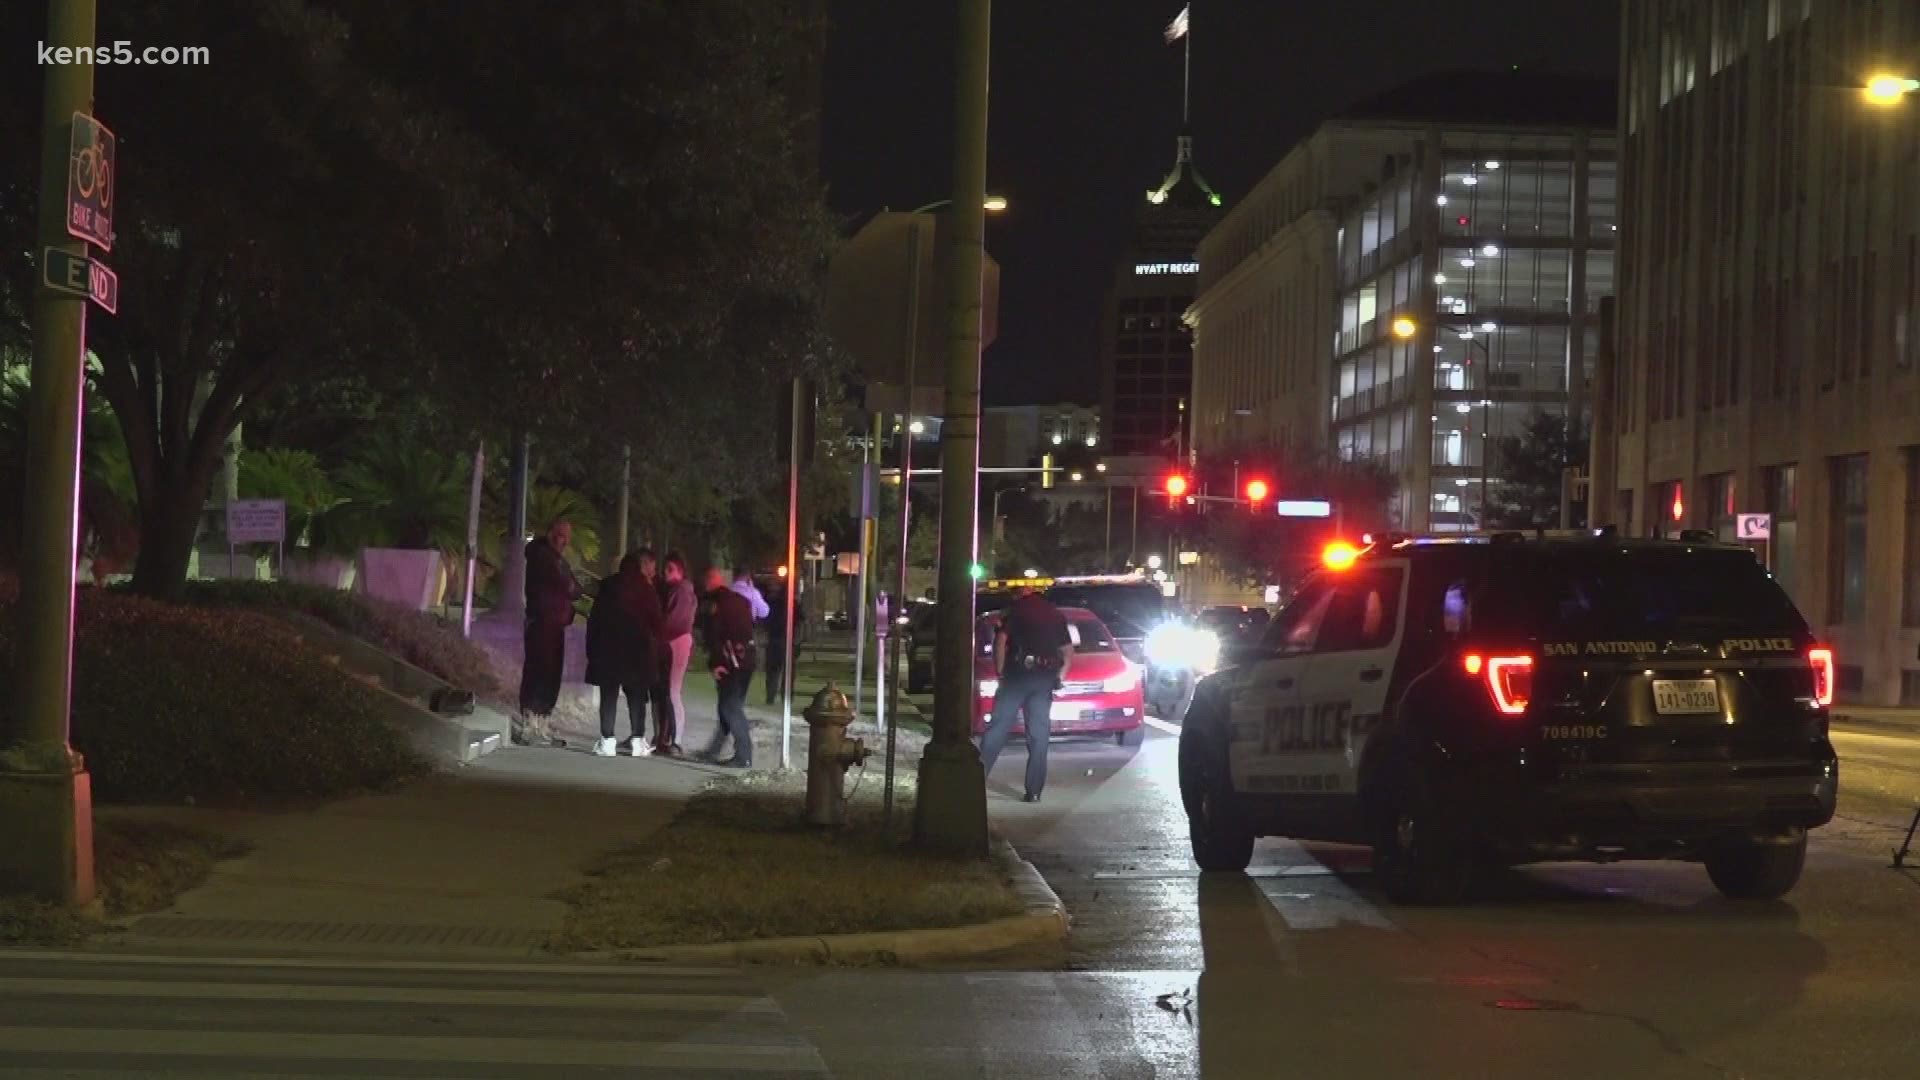 A man was stabbed near the Scottish Rite Library in downtown San Antonio early Saturday morning.